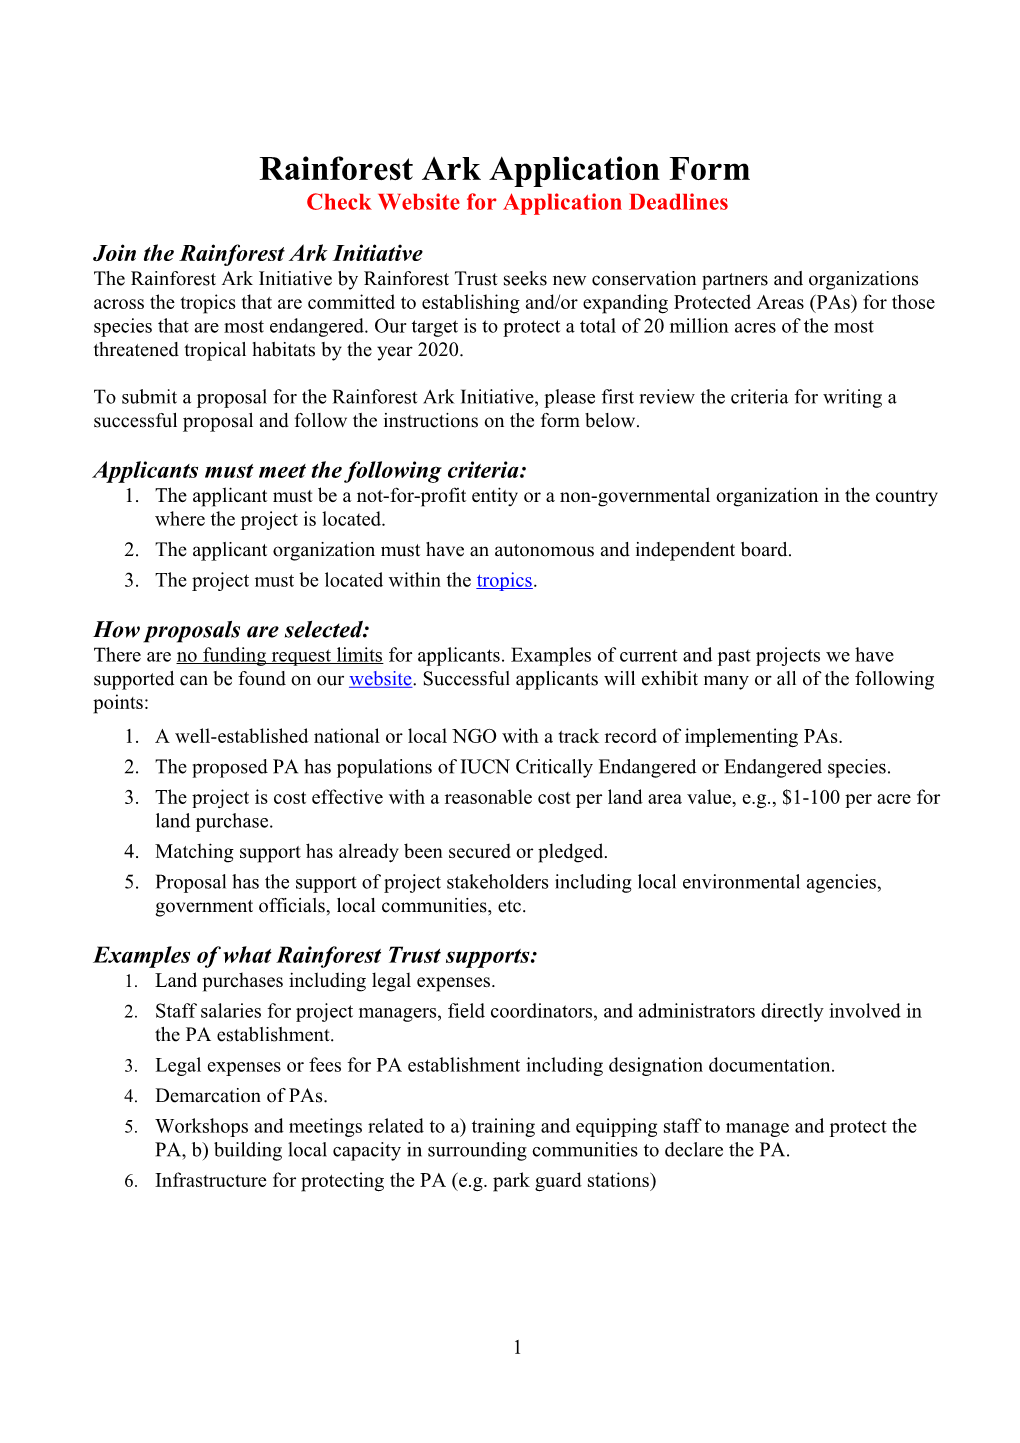 The BP Conservation Programme Application Form s1